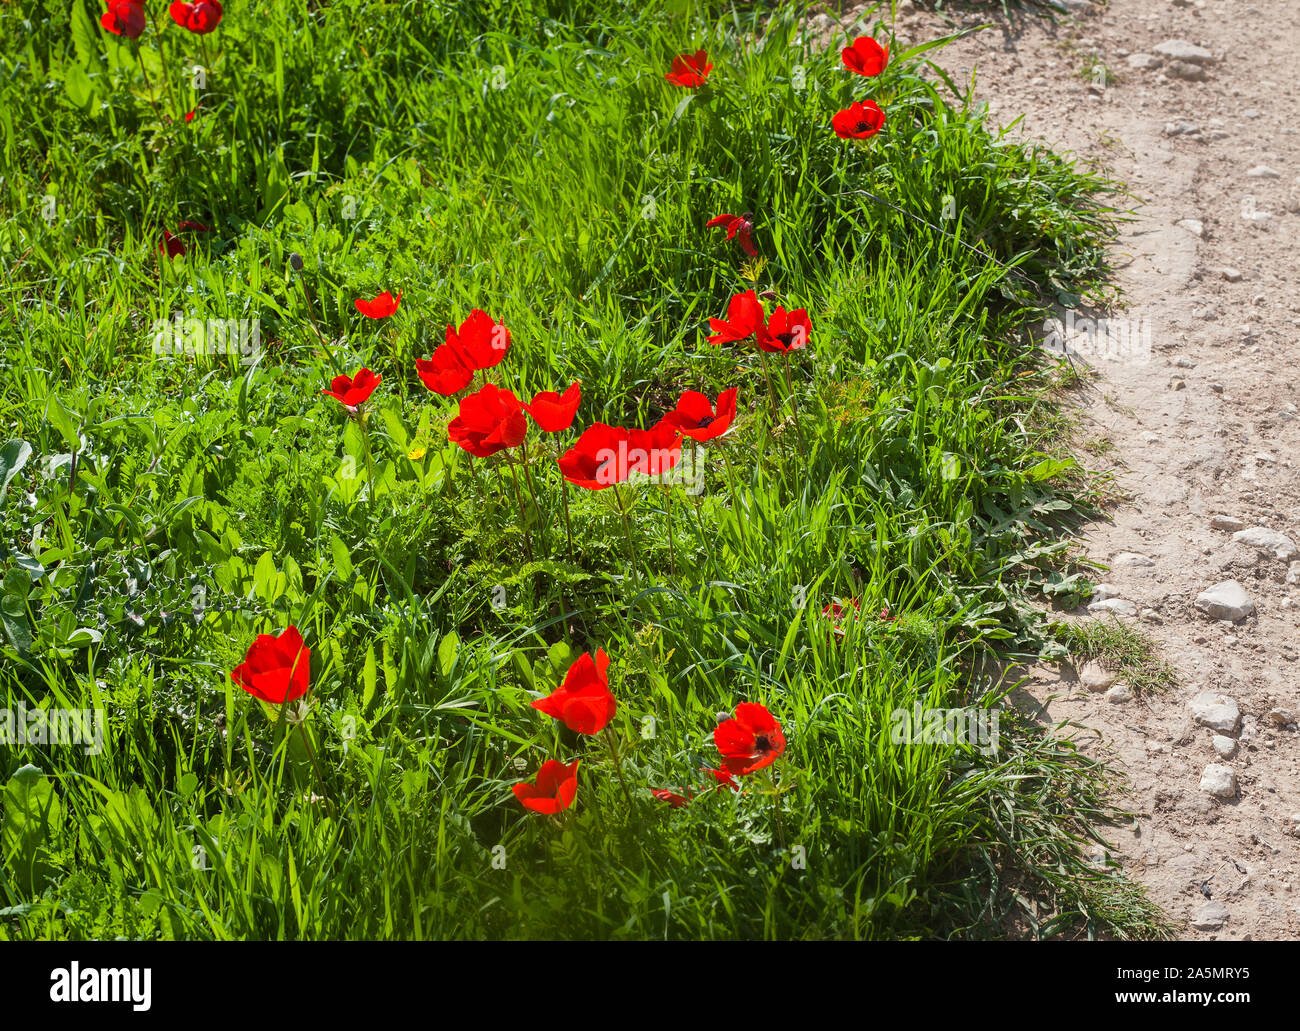 Red spring anemone flowers growing in the grass next to a piece of dead dry land - environment concept Stock Photo